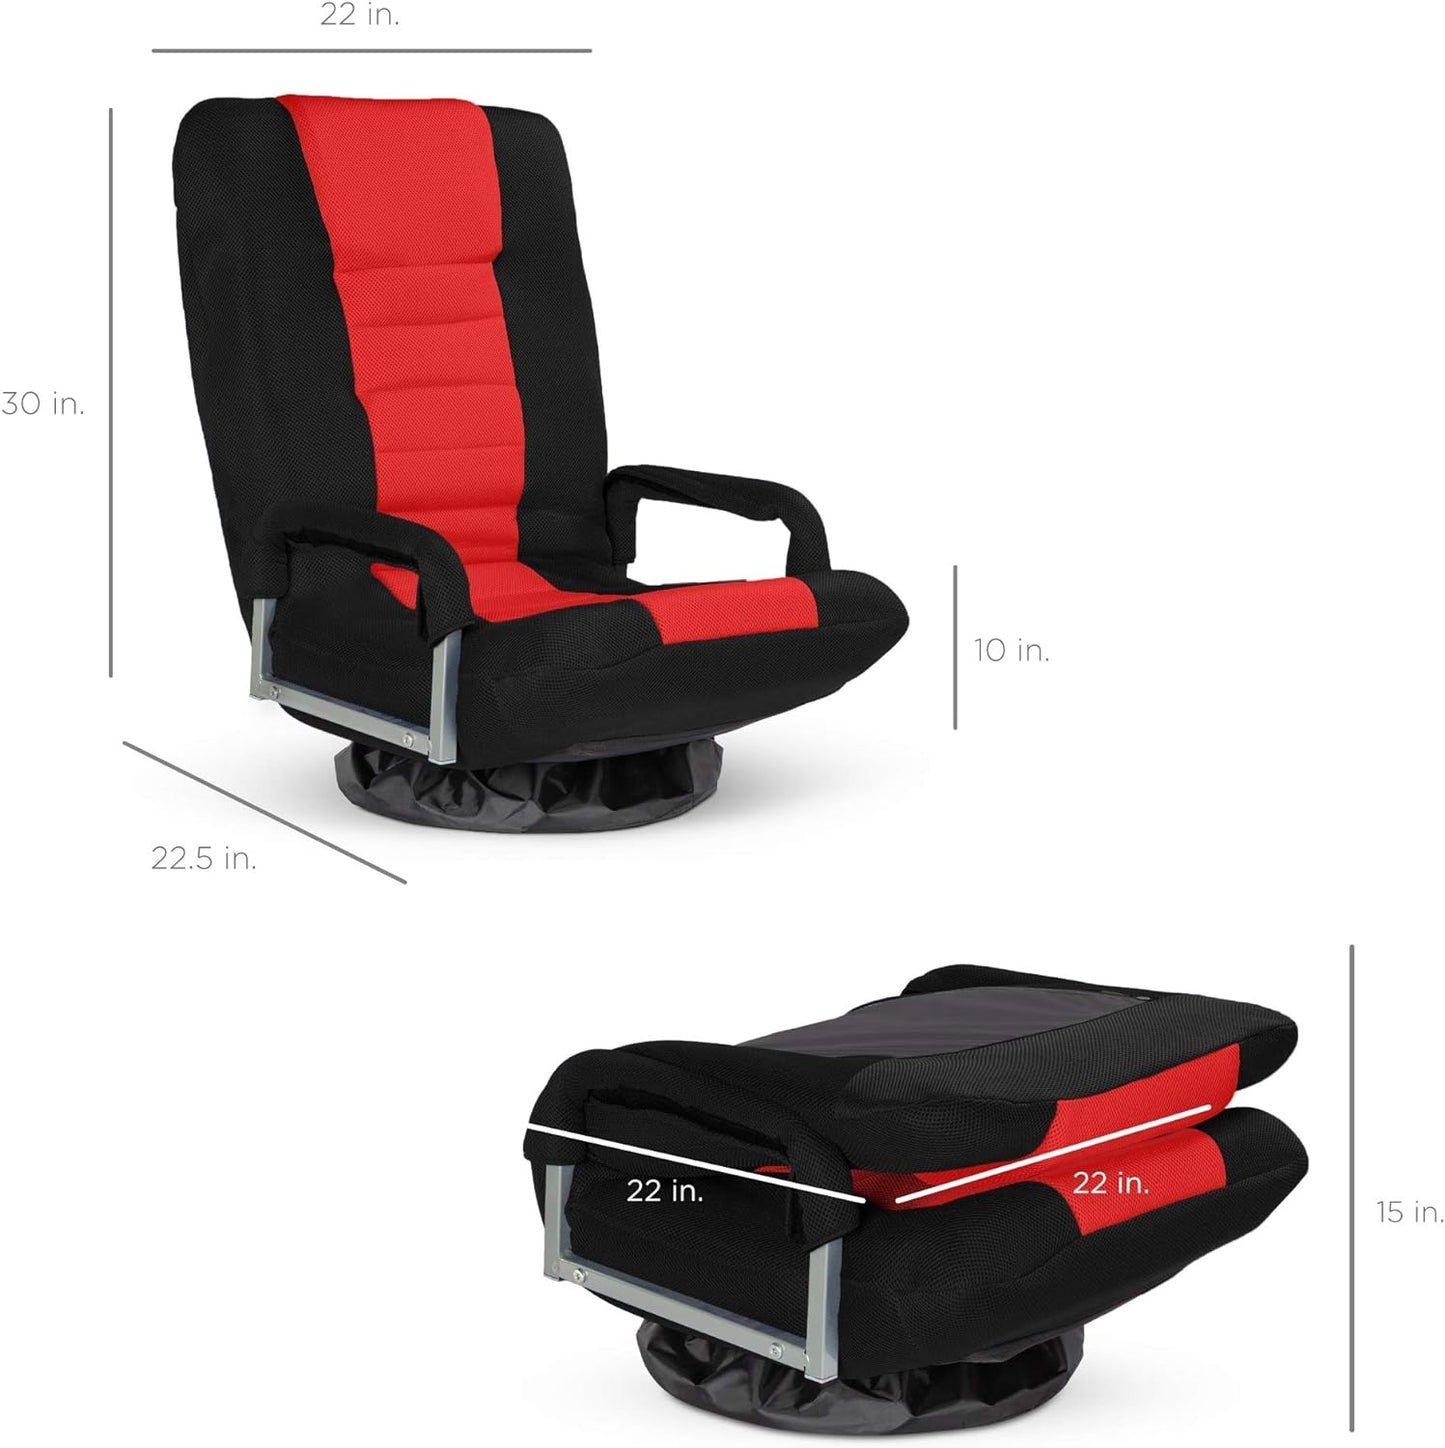 Best Choice Products Swivel Gaming Chair 360 Degree Multipurpose Floor Chair Rocker for TV, Reading, Playing Video Games w/Lumbar Support, Armrest Handles, Adjustable Backrest - Black/Red